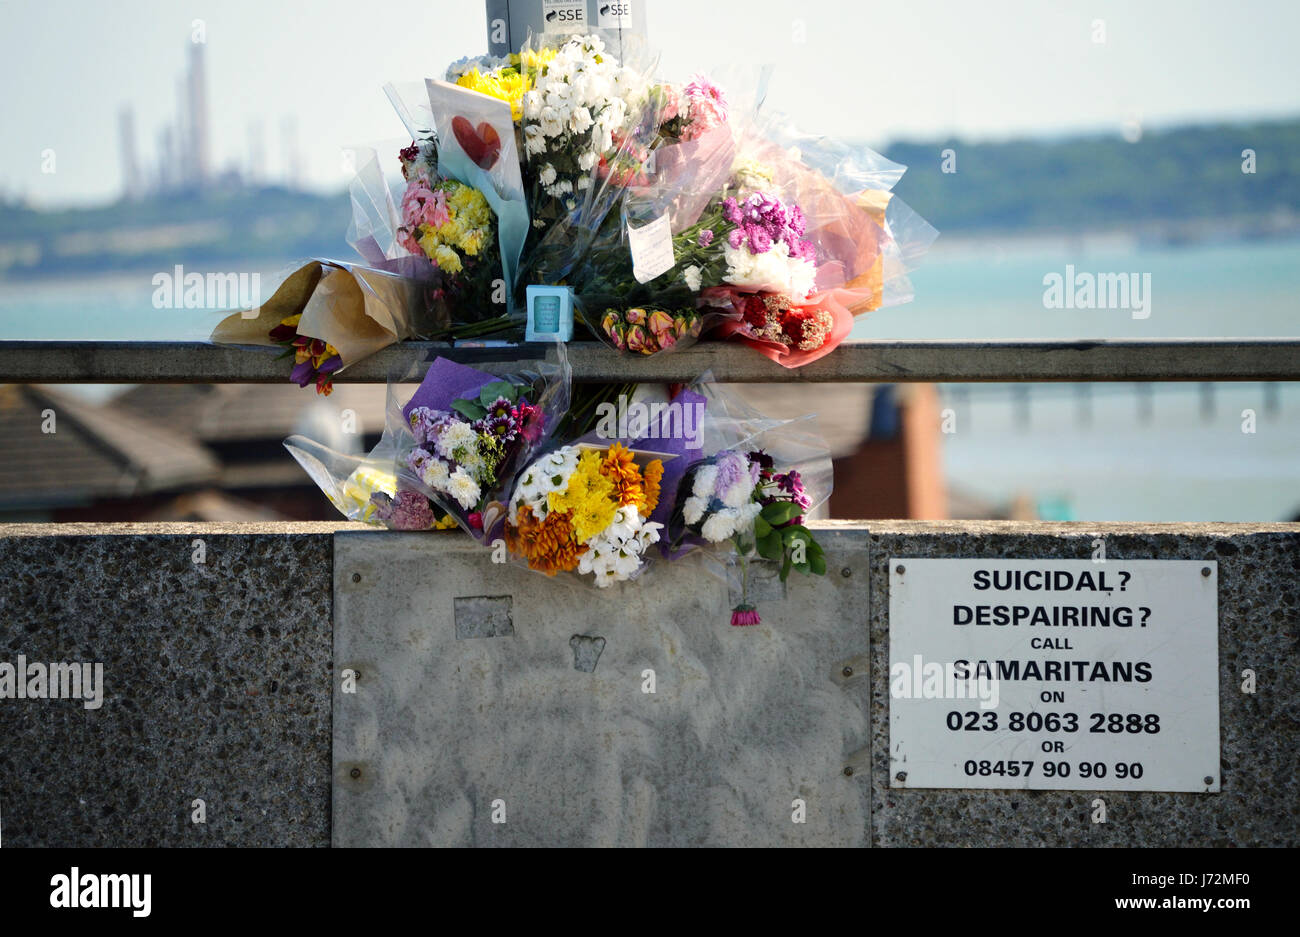 Floral tributes laid in memory of a suicide victim on Itchen bridge in Southampton, UK, with the Samaritans helpline number next to it Stock Photo